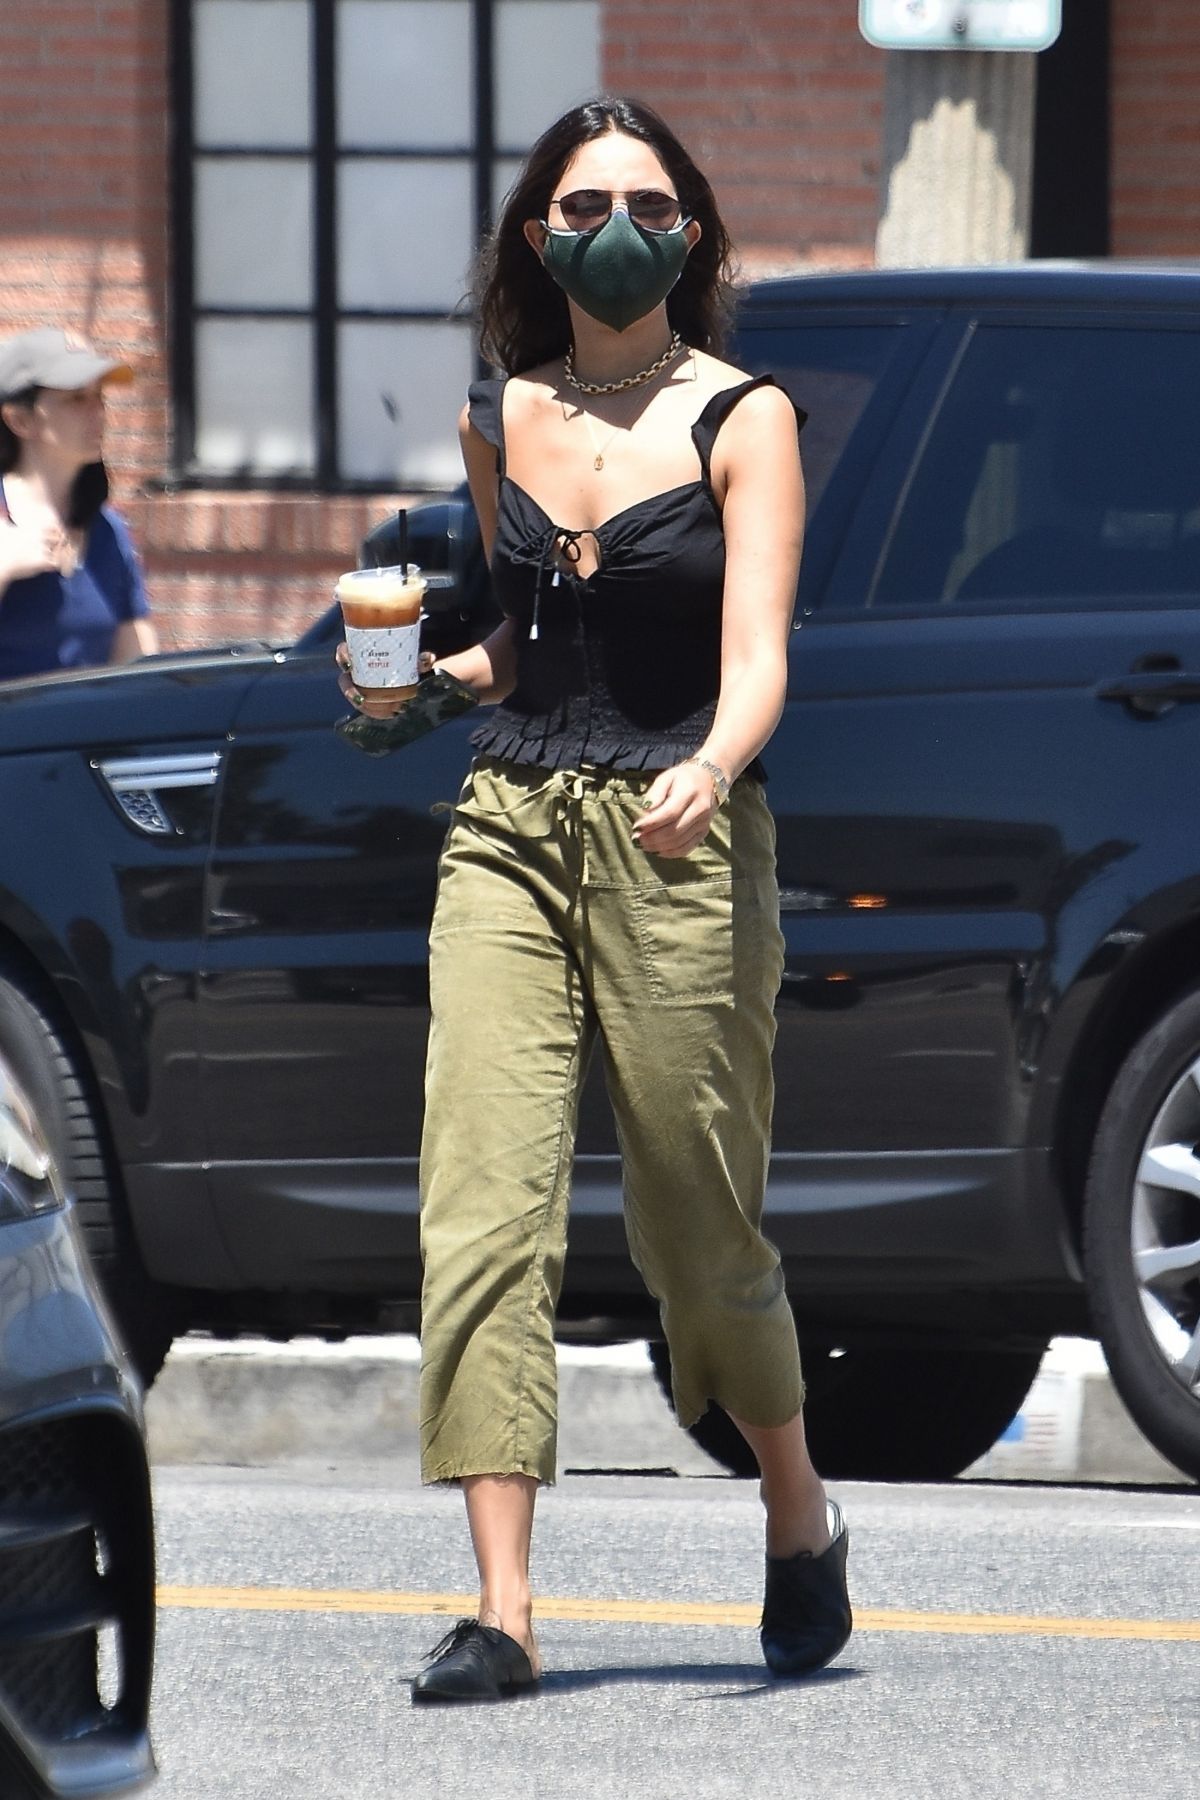 eiza-gonzalez-out-for-coffee-in-west-hollywood-05-03-2021-5.jpg